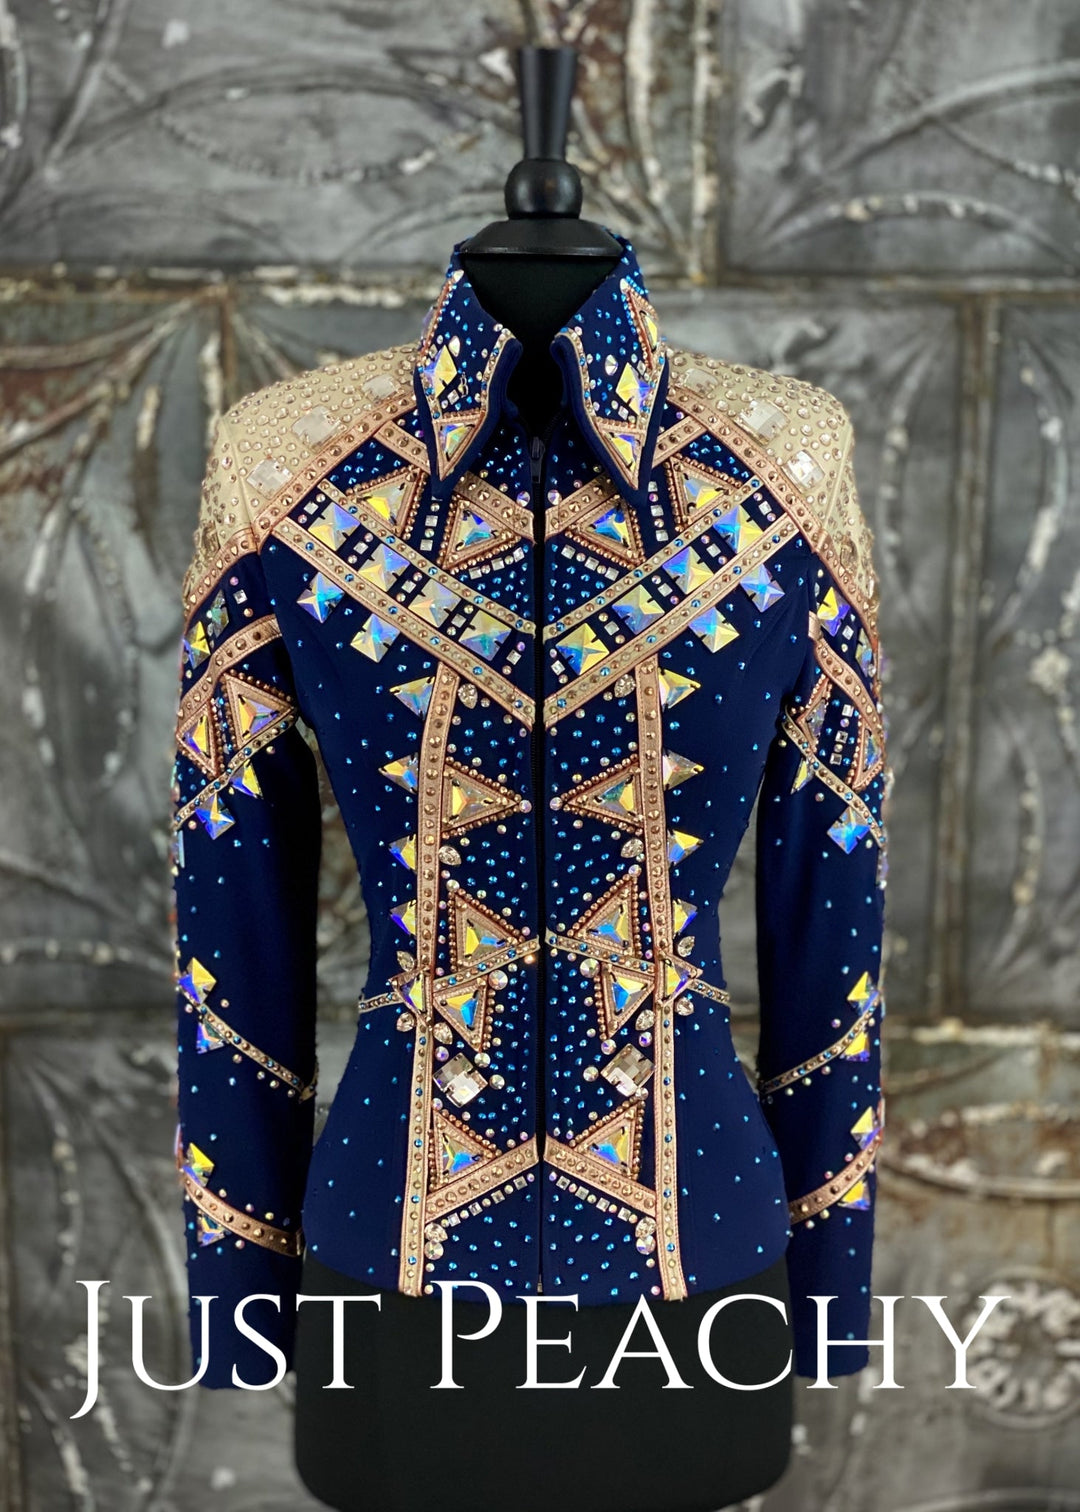 Rose Gold, Champagne and Navy Blue Showmanship Outfit by Brittz Glitz ~ Just Peachy Show Clothing